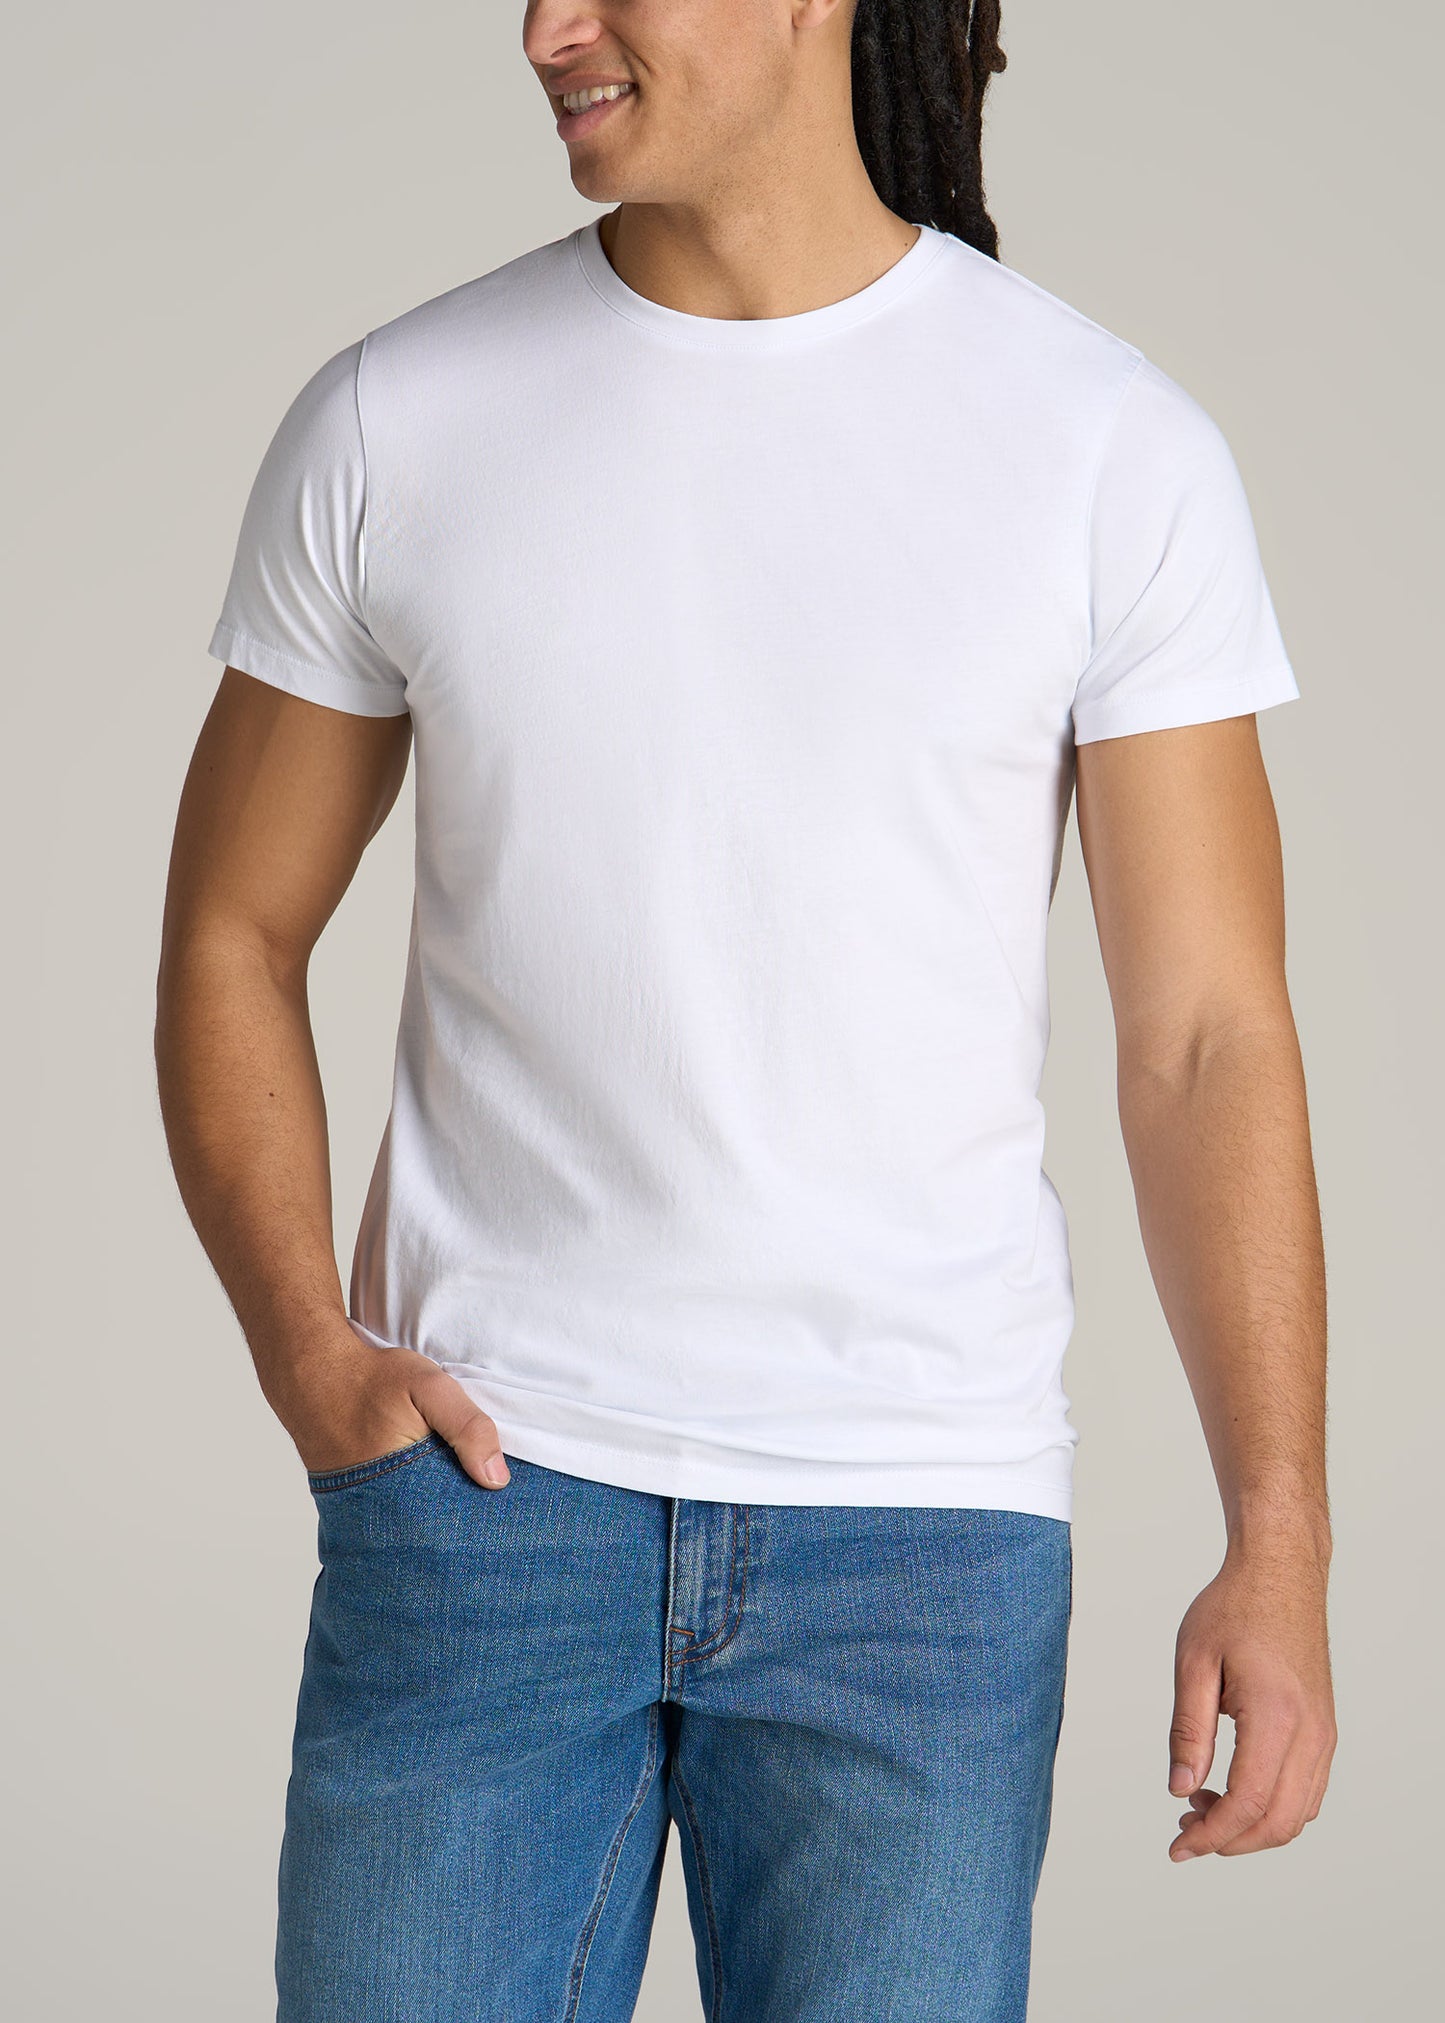 MODERN-FIT Garment Dyed Cotton Men's Tall T-Shirt in White